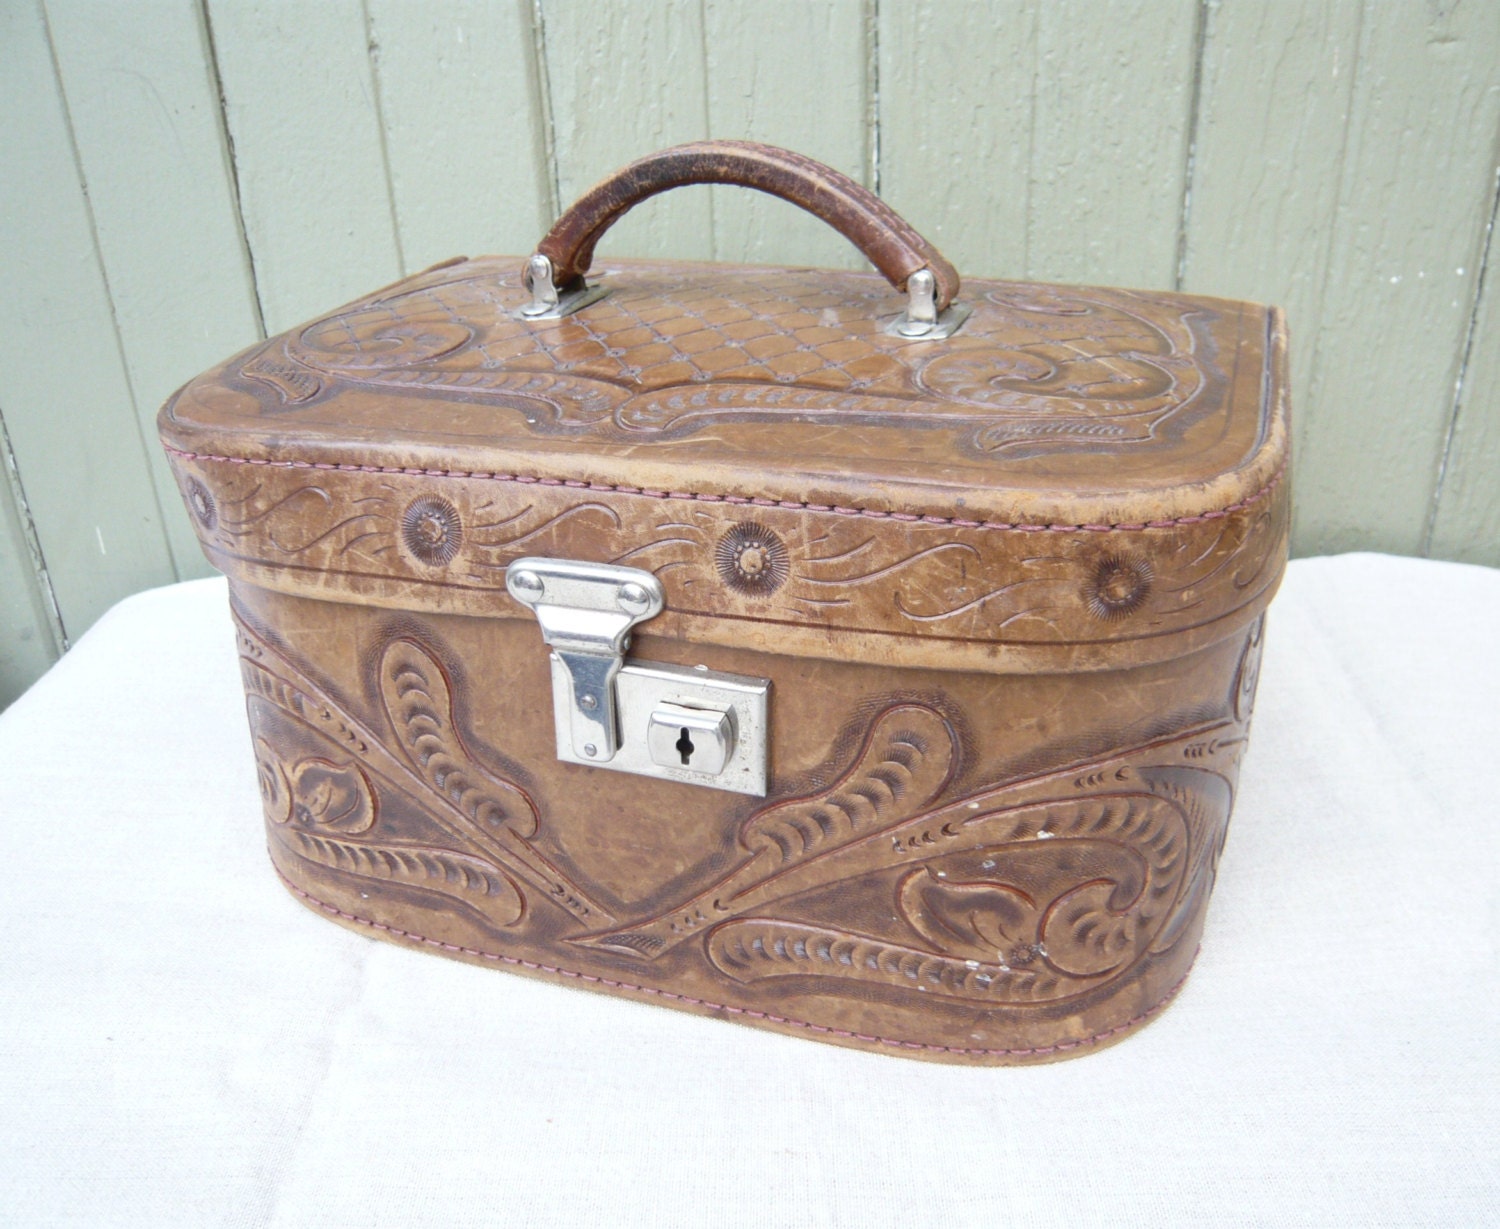 1950s Vintage Tooled Leather Train Case Suitcase by Gaitan.